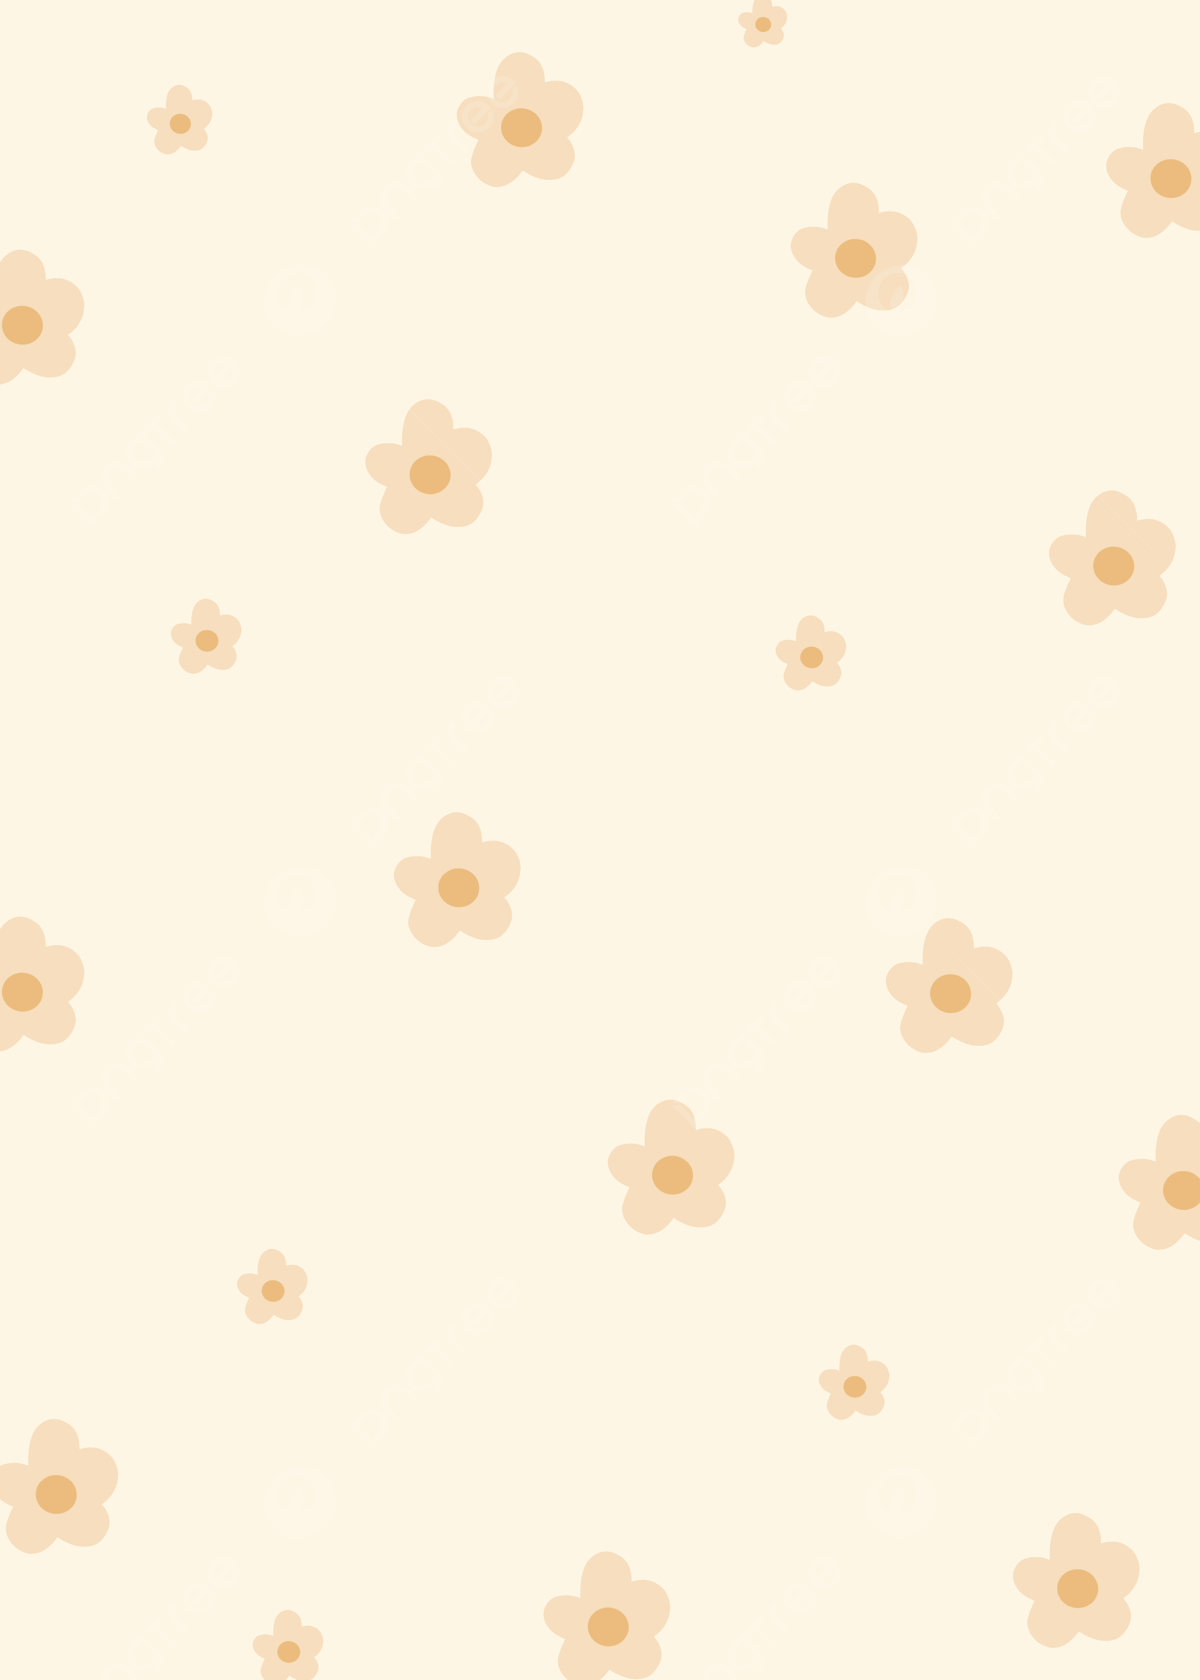 Aesthetic Cream Background Image, HD Picture and Wallpaper For Free Download